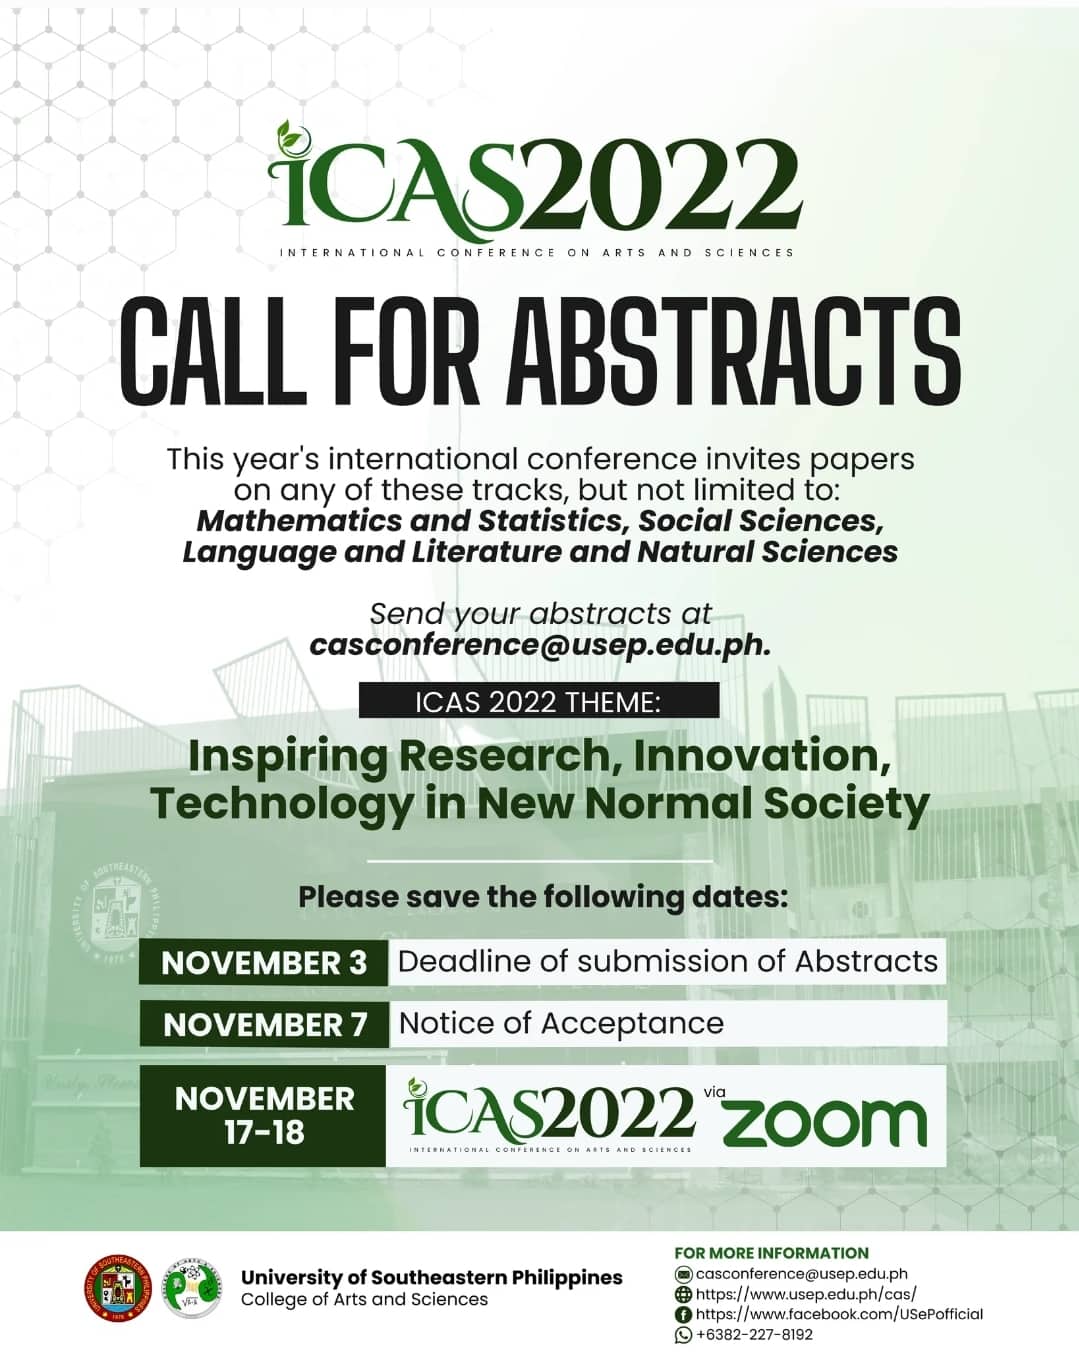 CALL FOR ABSTRACTS > USeP International Conference of Arts and Sciences (iCAS 2022)